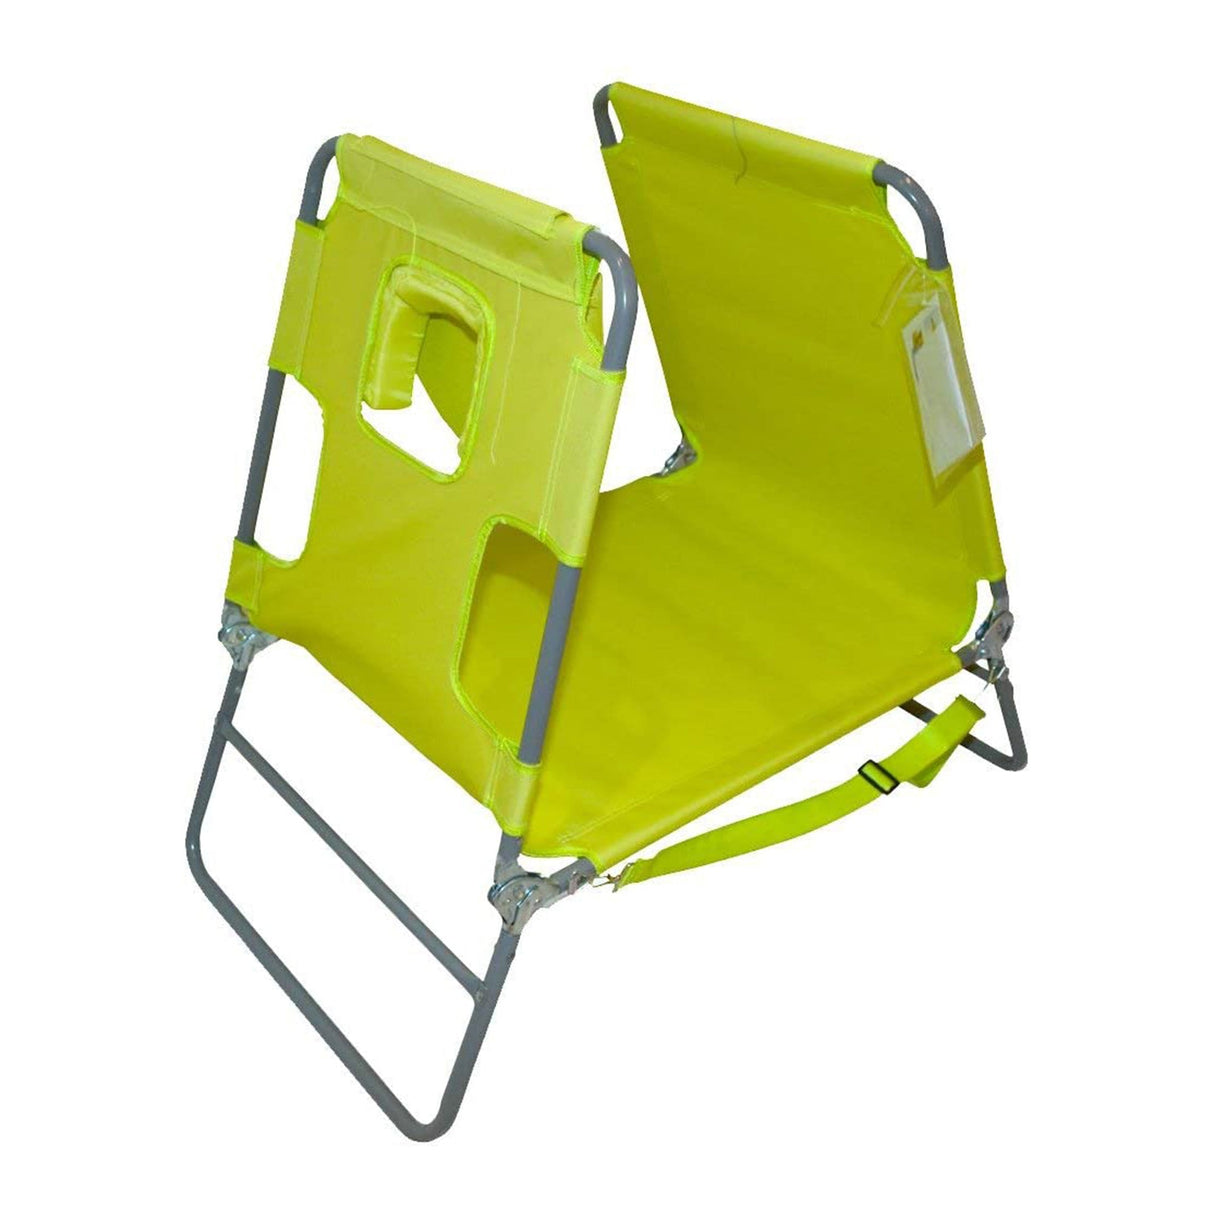 Ostrich Chaise Lounge Foldable Sunbathing Beach Lawn Chair, Neon Green (2 Pack)